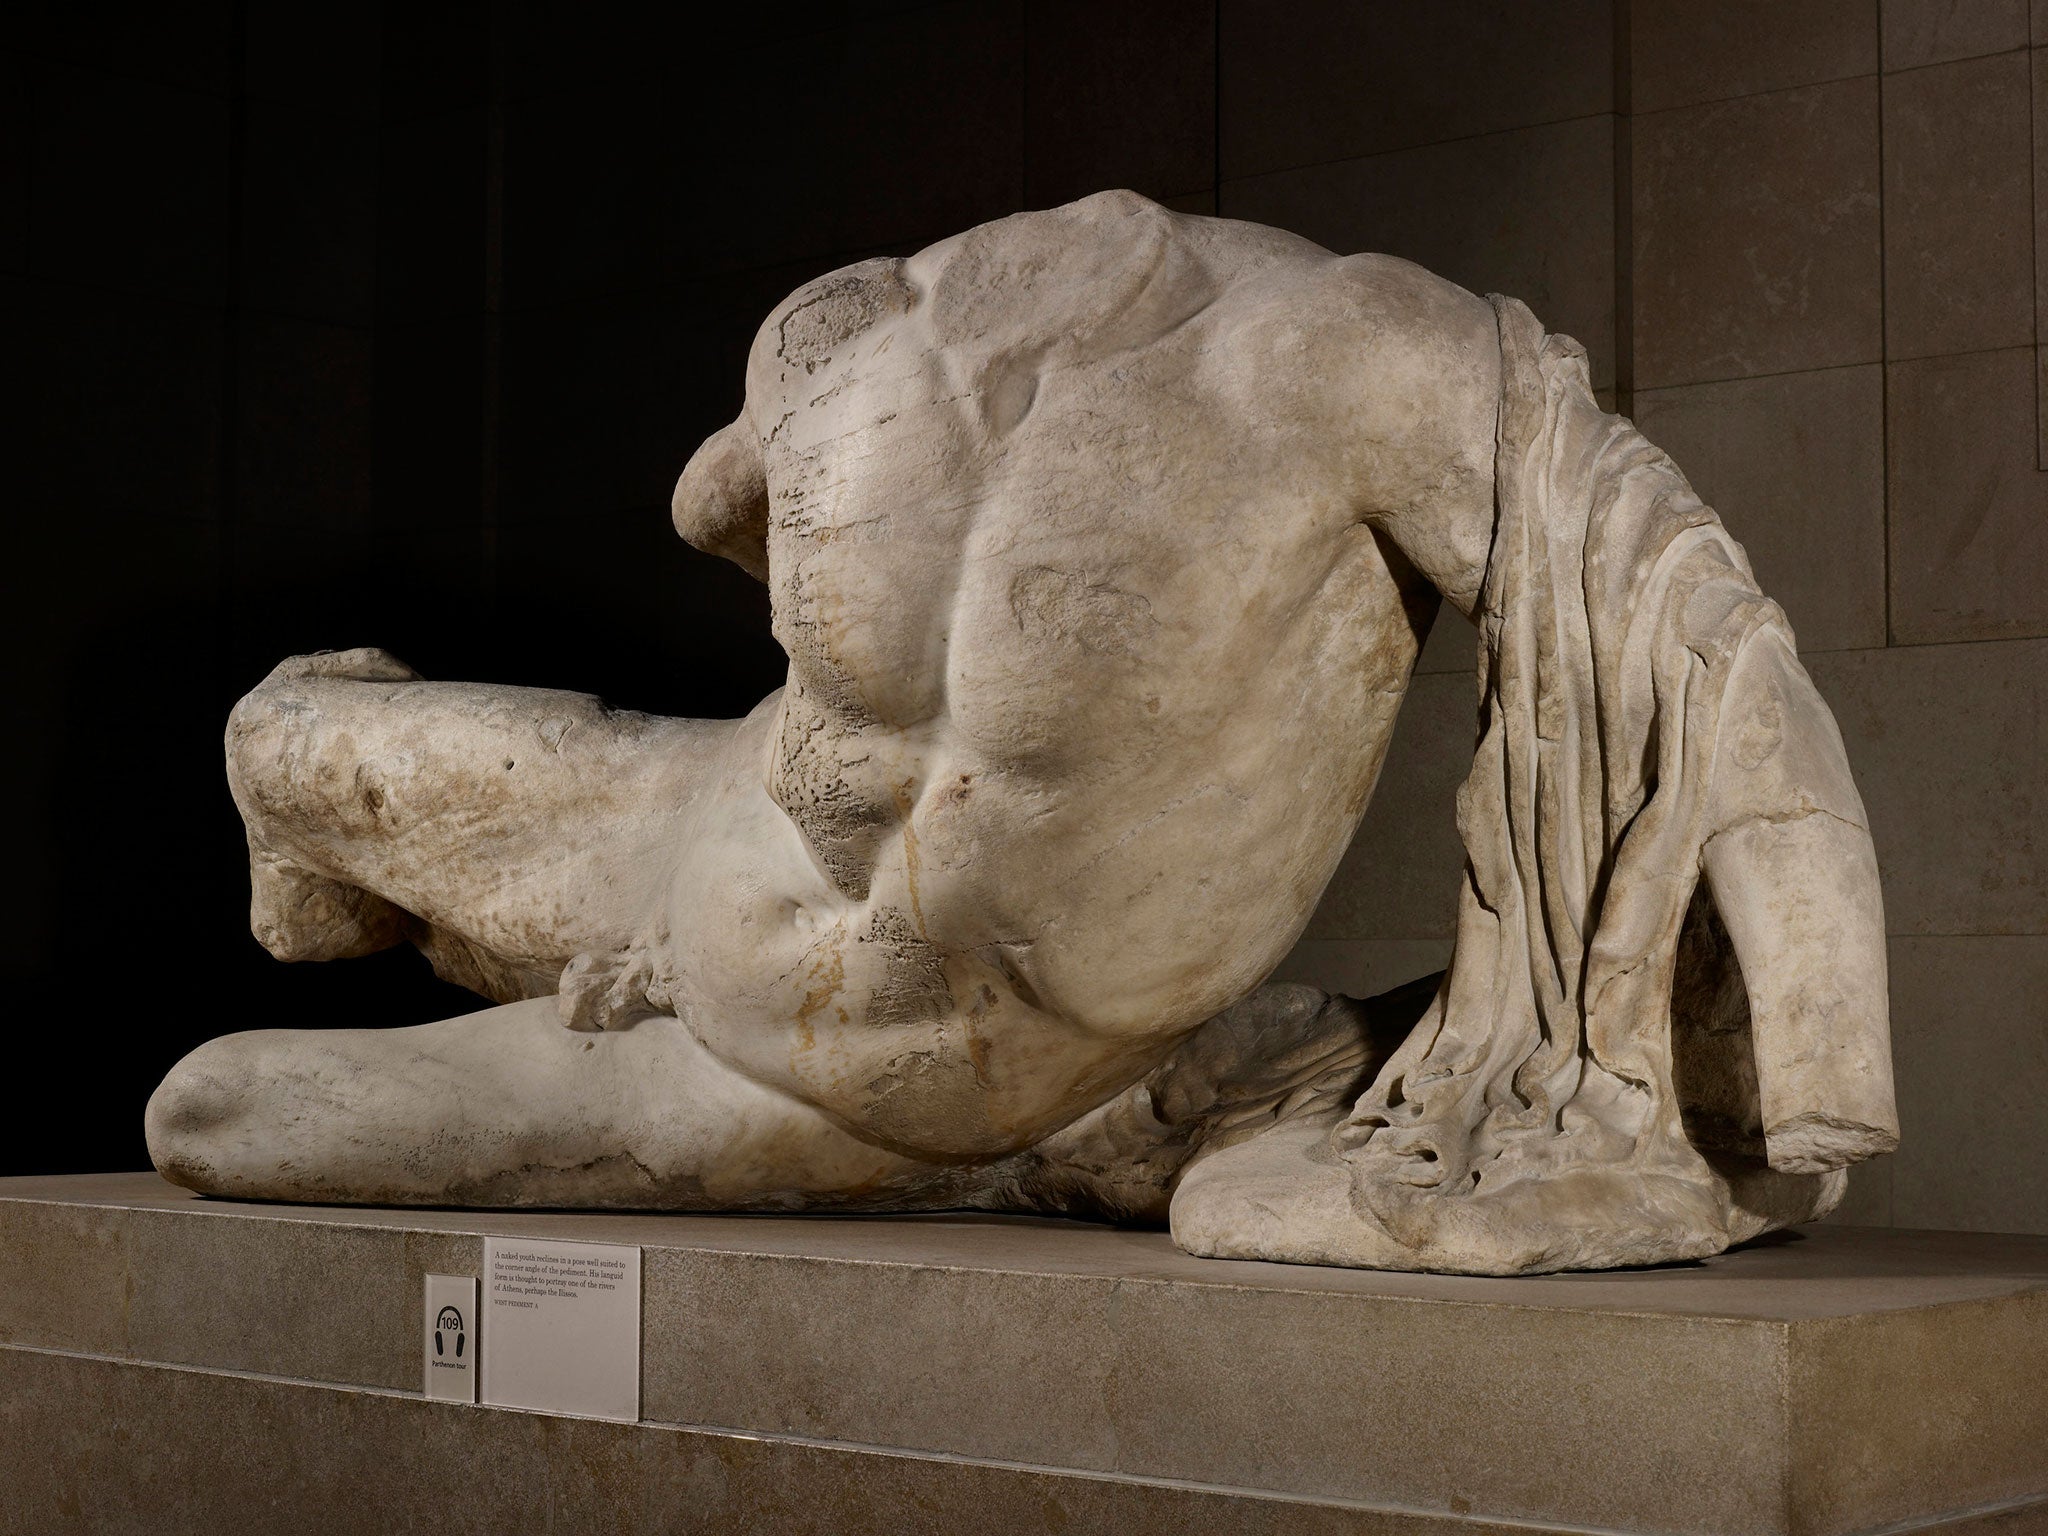 A statue of the River God Ilissos by Phidias, part of the ‘Elgin Marbles’ and on display at the British Museum